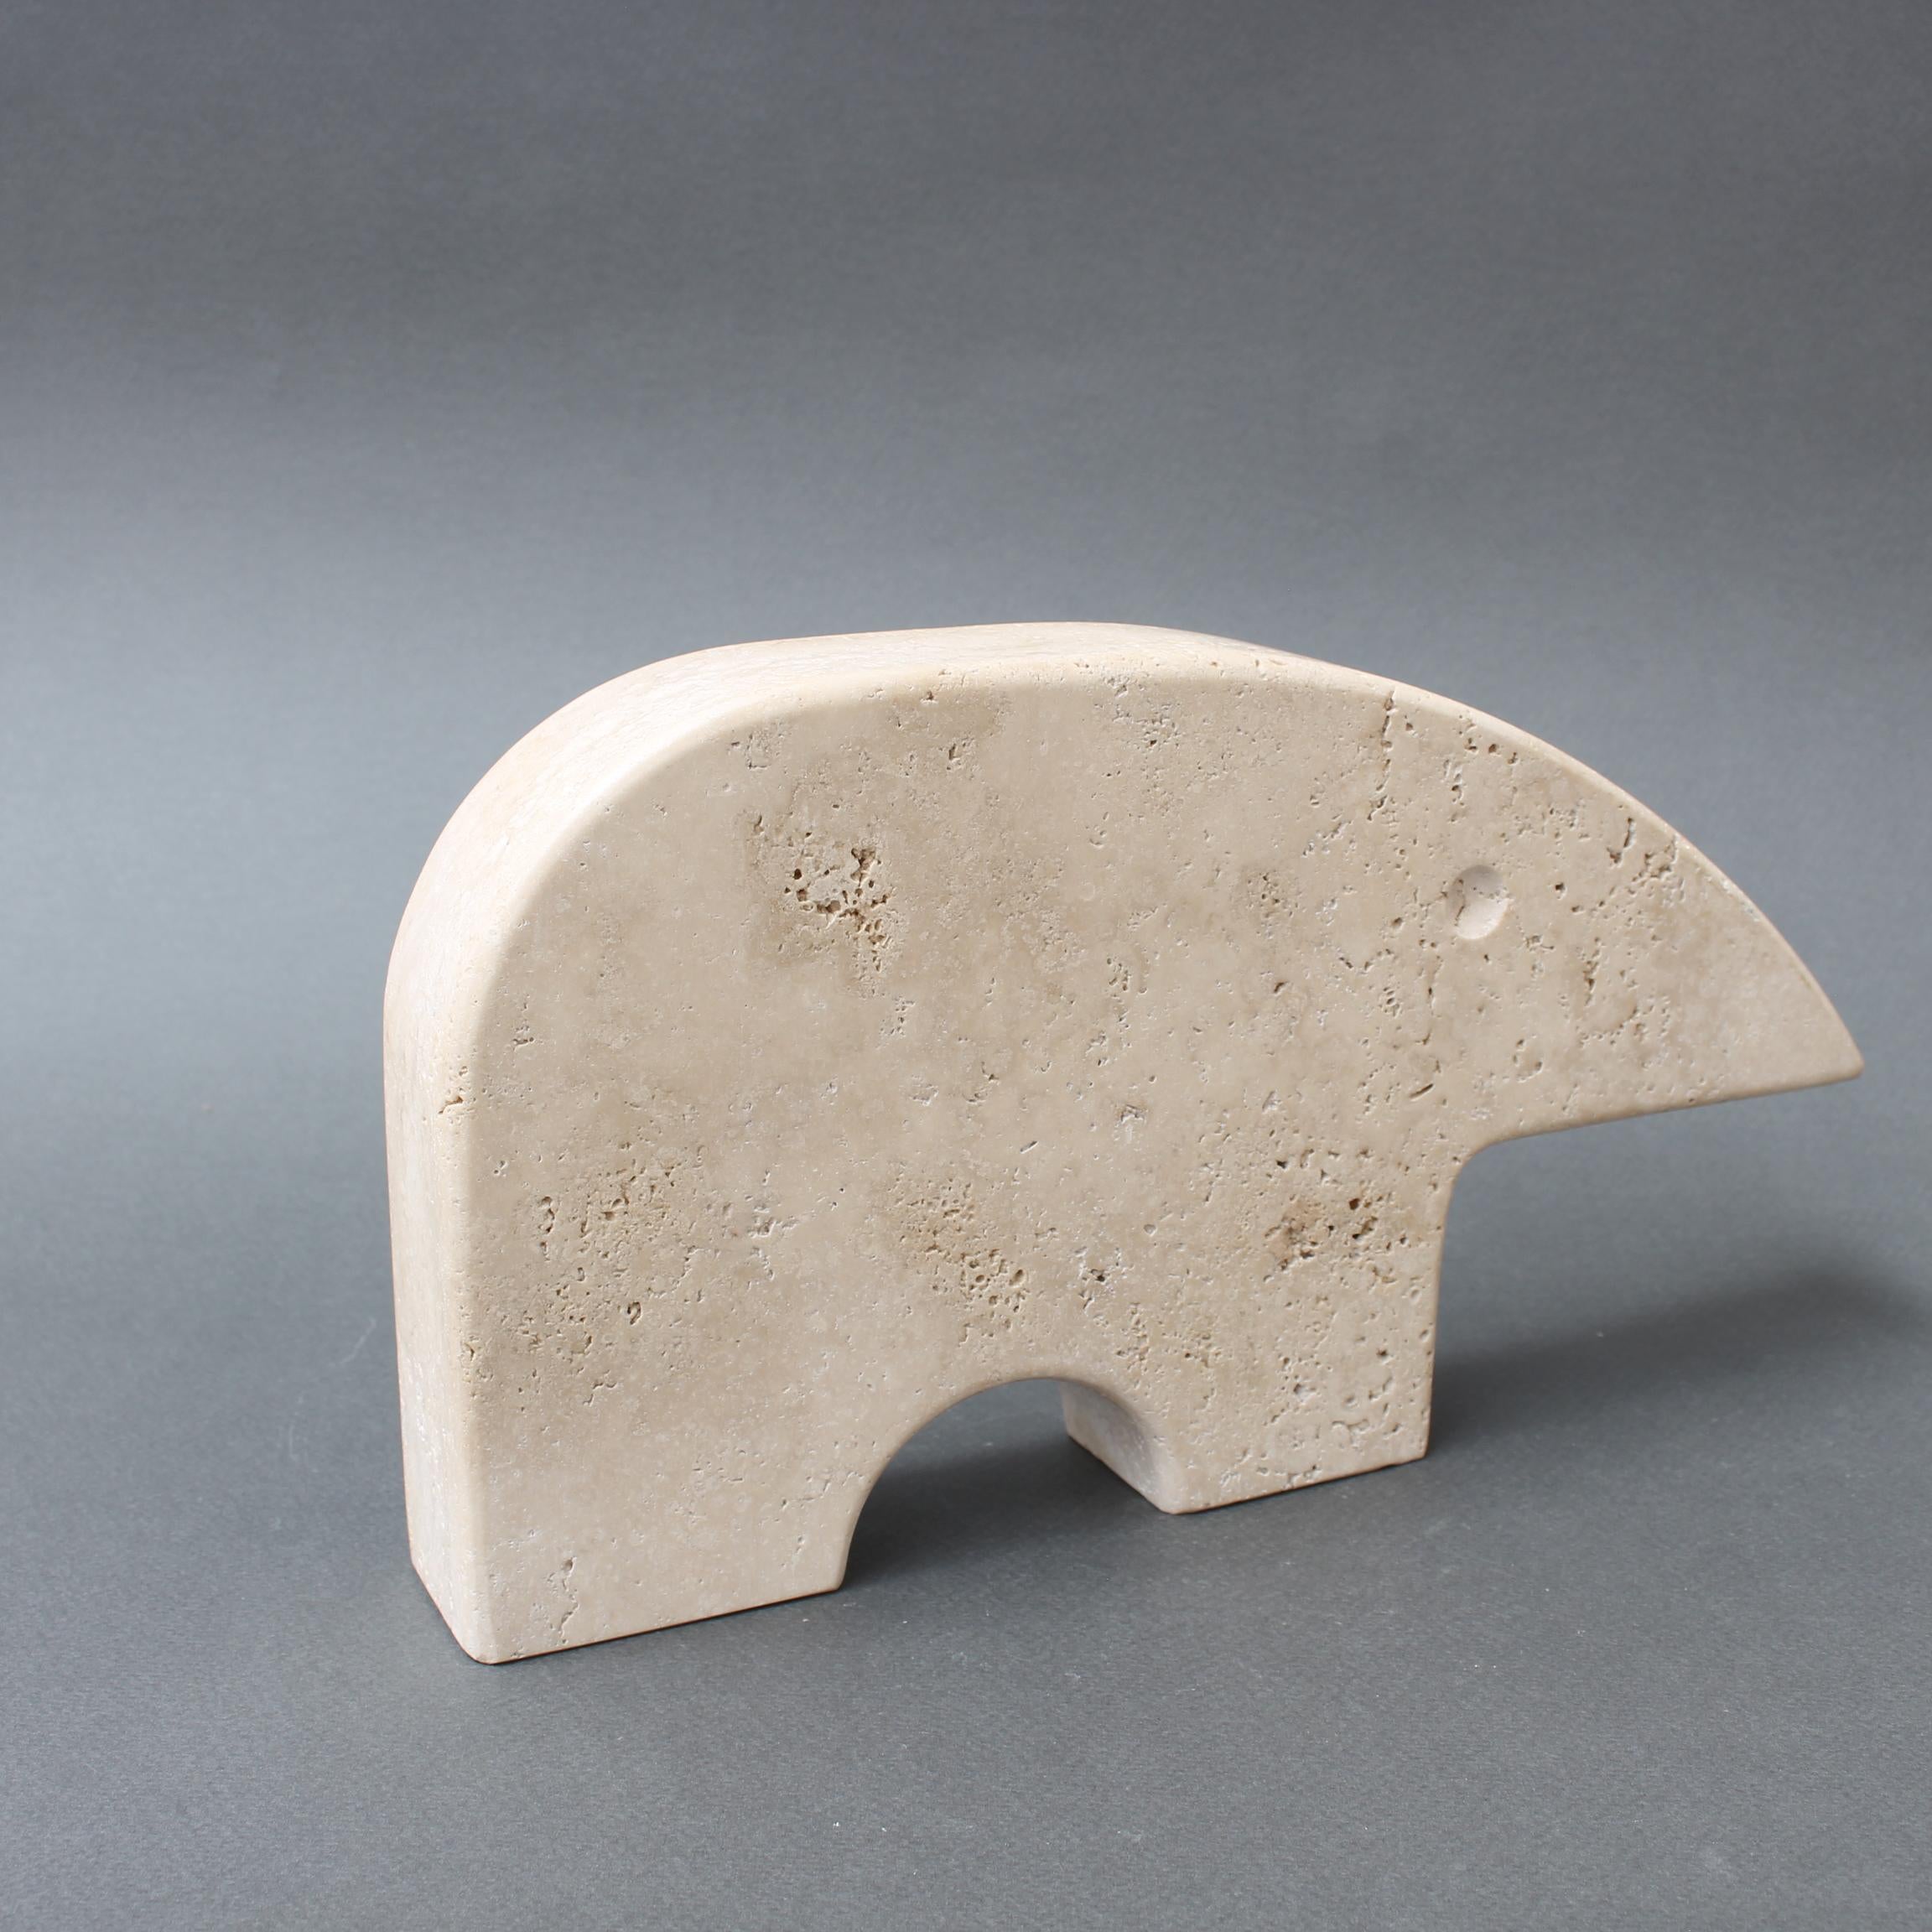 Vintage Italian Travertine Aardvark Table Sculpture by Mannelli Bros In Good Condition For Sale In London, GB